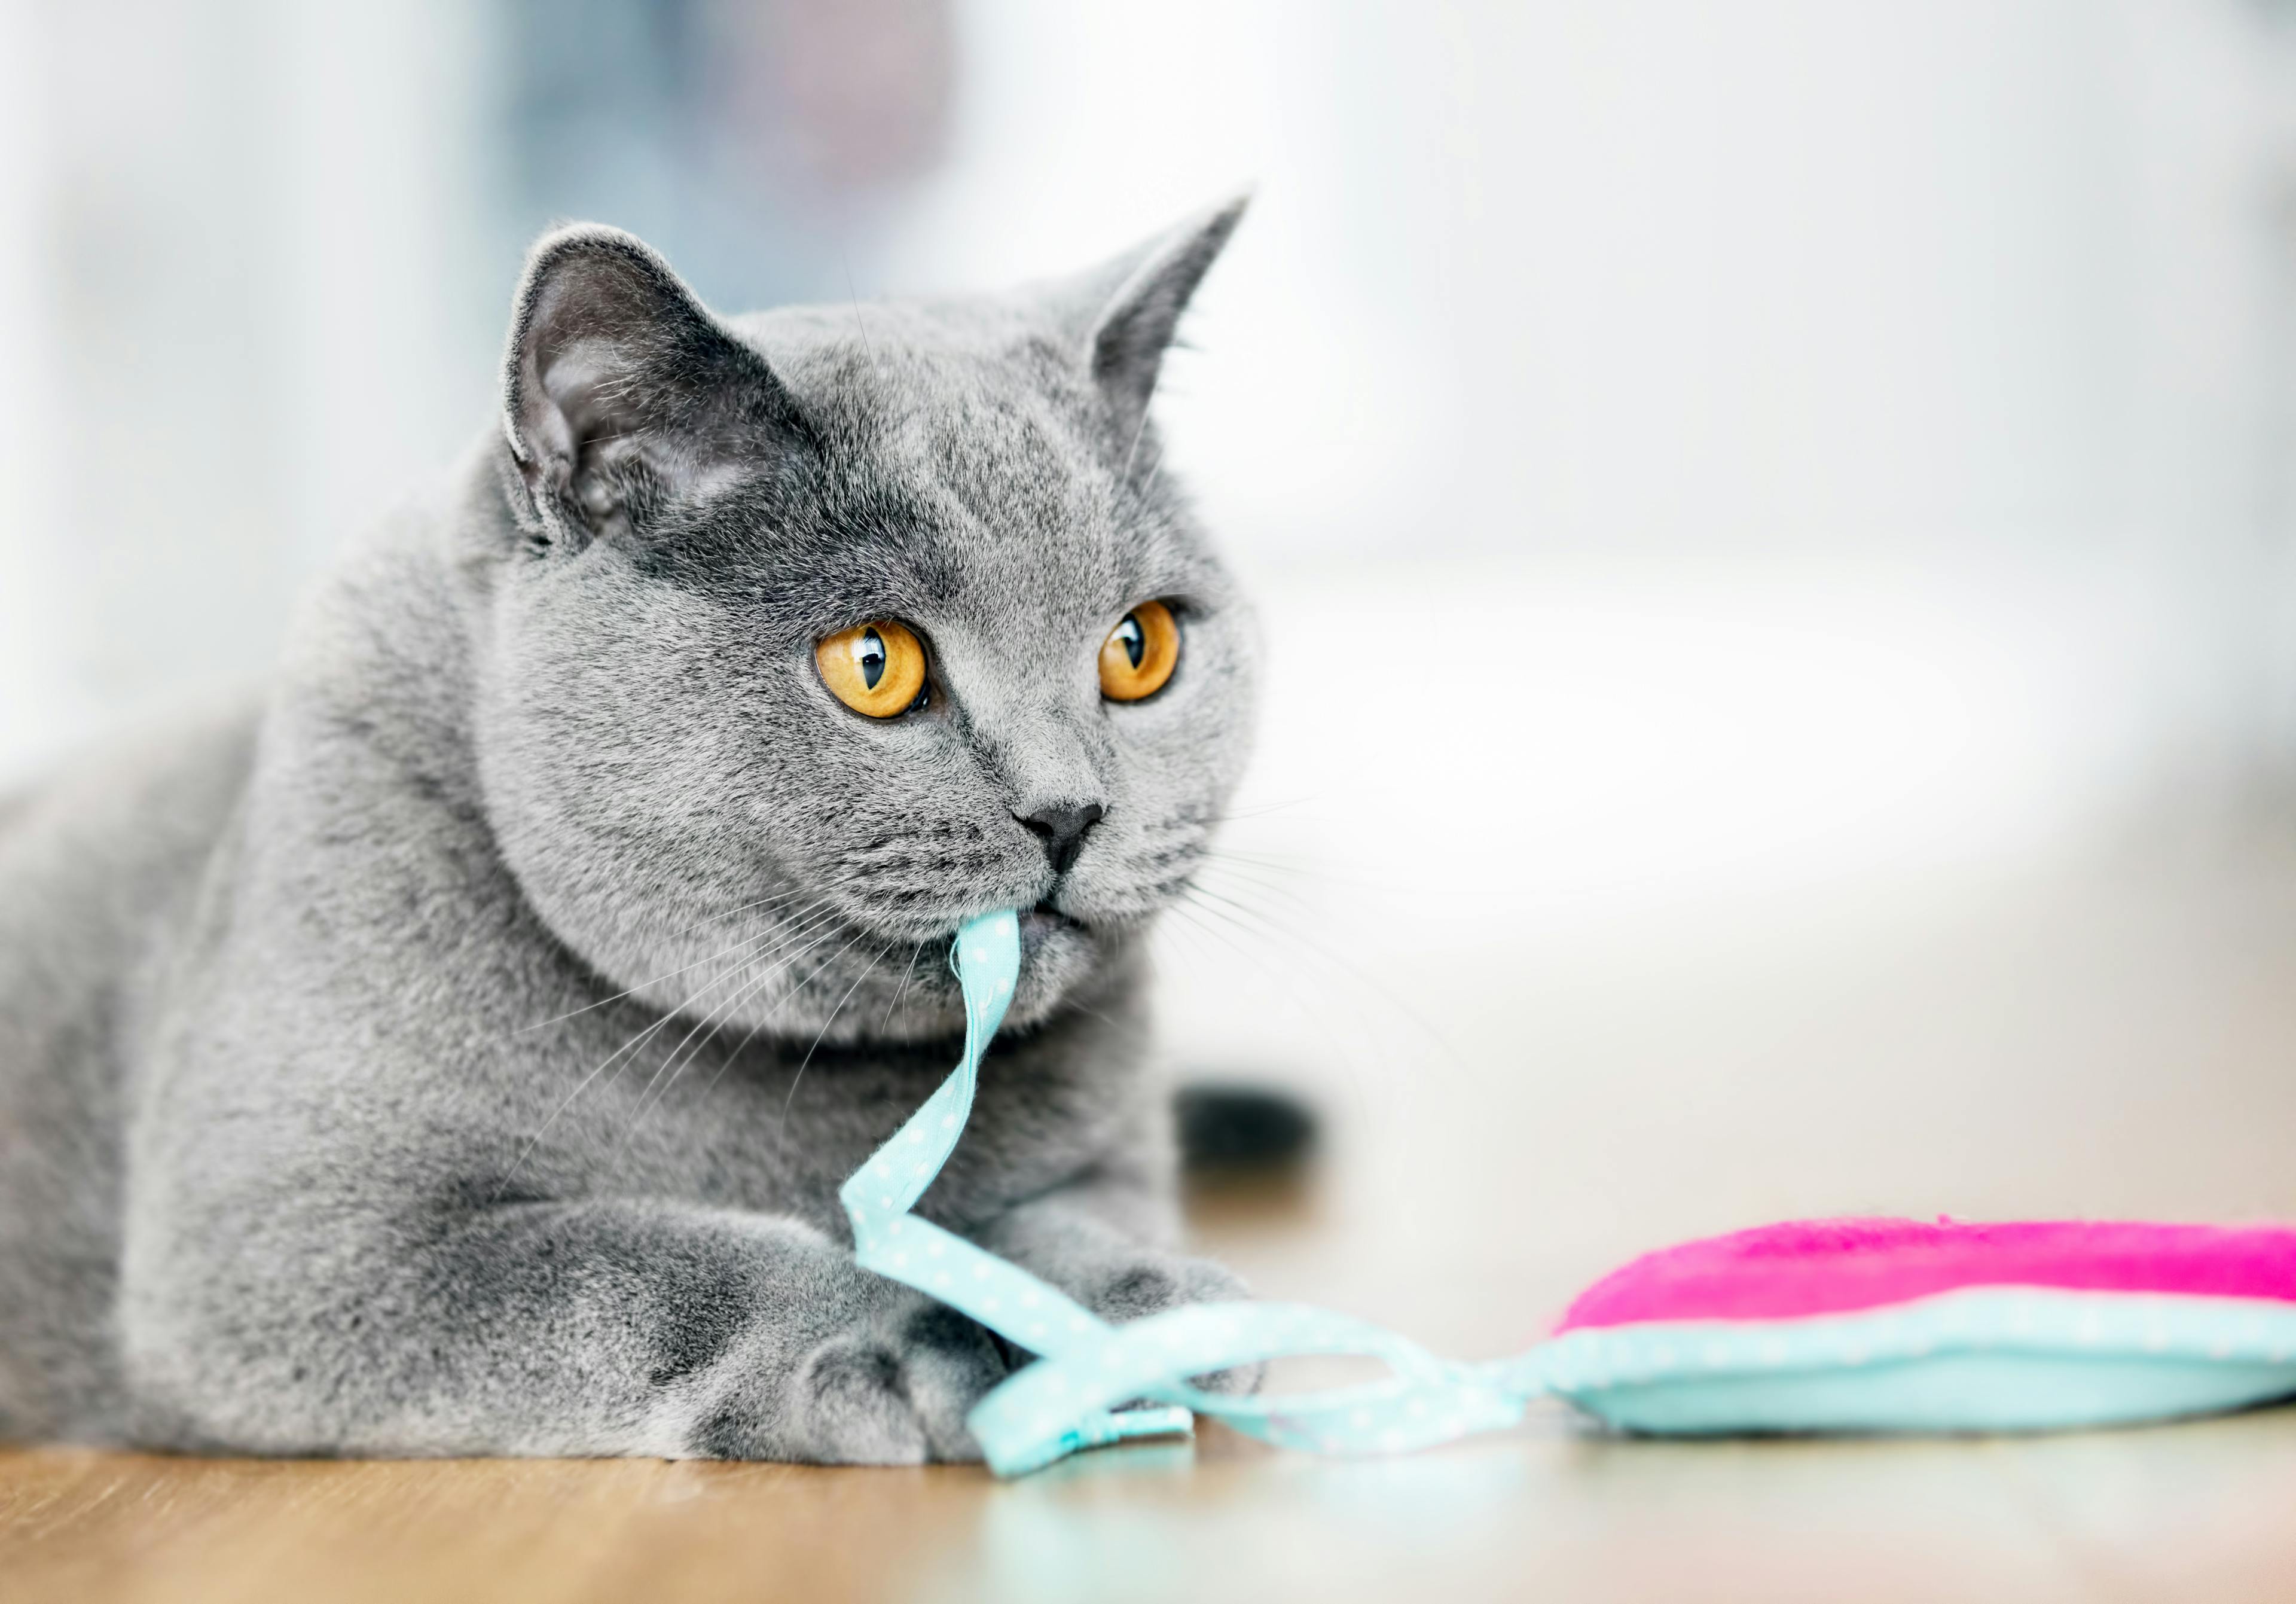 Cat Tricks: Tricks to Teach Your Feline That Can Help You Bond Together